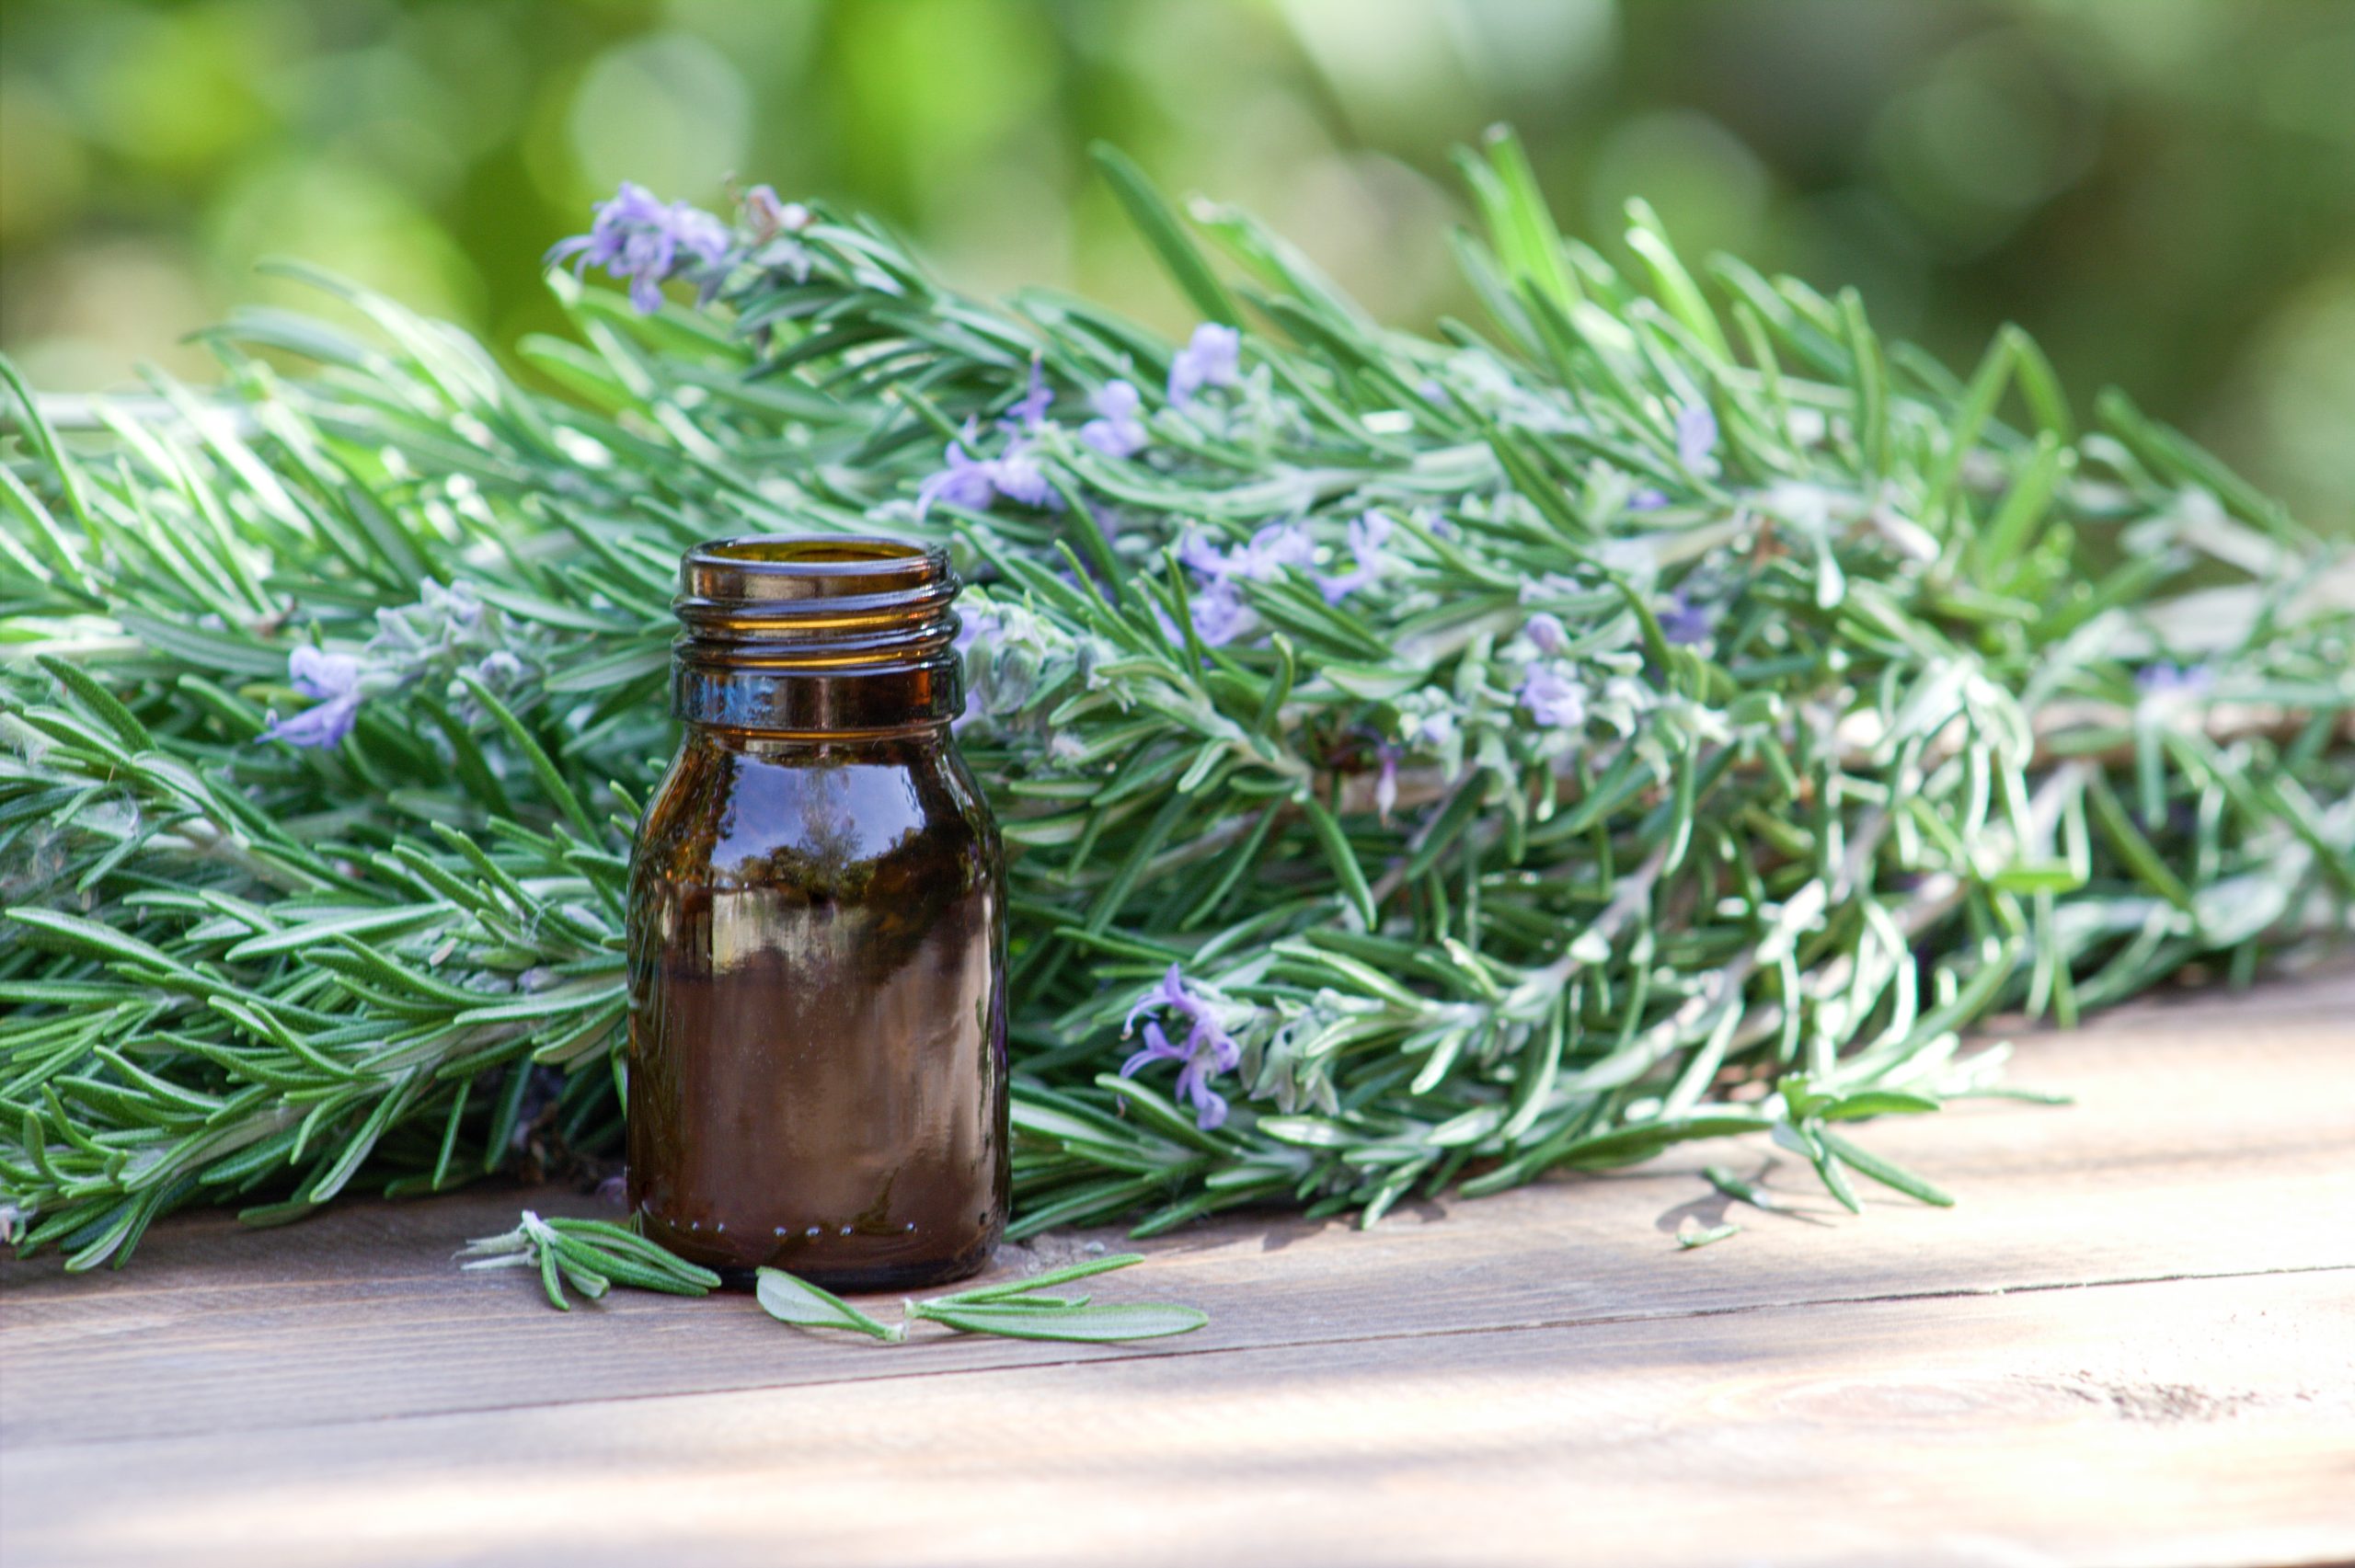 Rosemary and its impact on hair growth